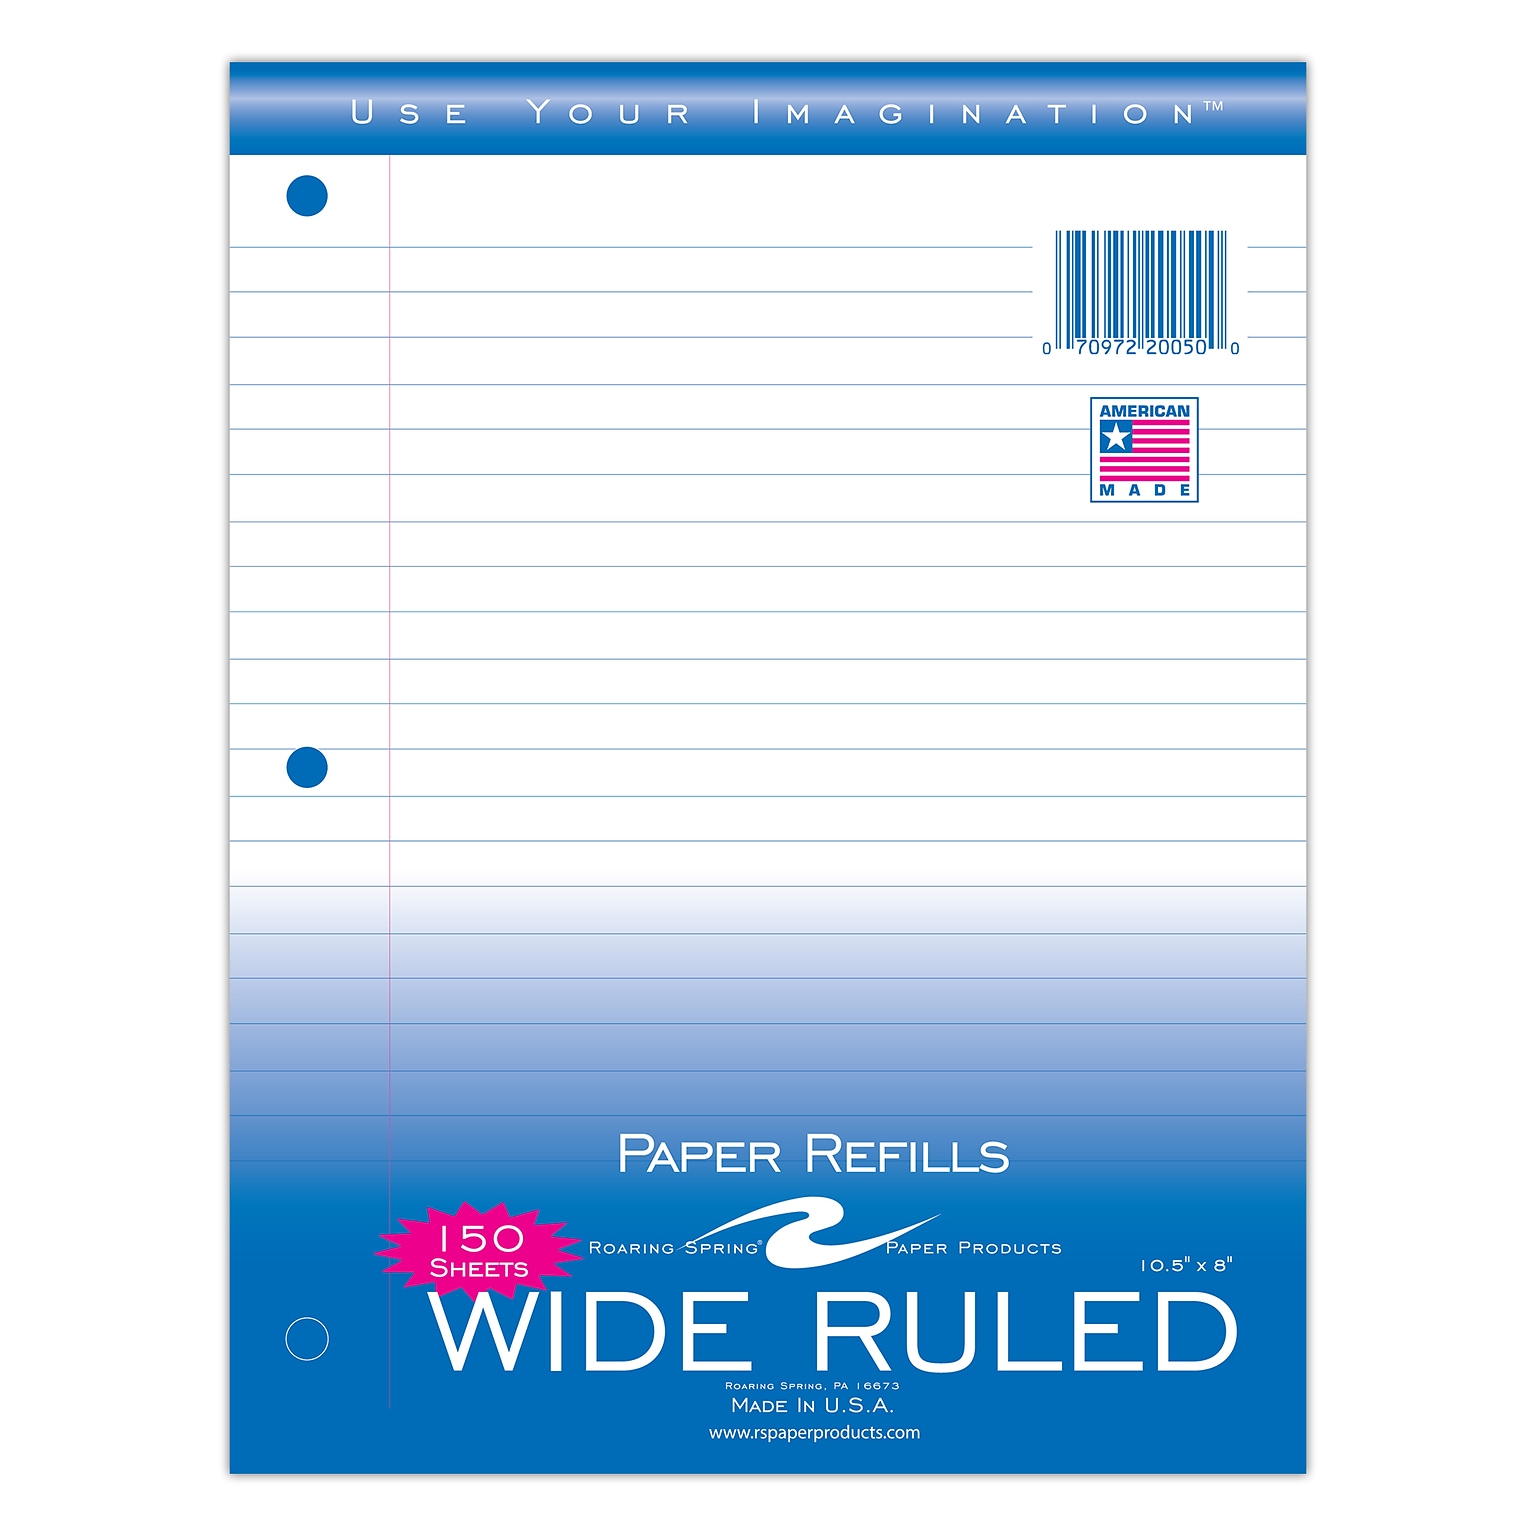 Roaring Spring Paper Products Wide Ruled Filler Paper, 8 x 10.5, 3-Hole Punched, 150 Sheets/Pack, 24/Case (20050CS)